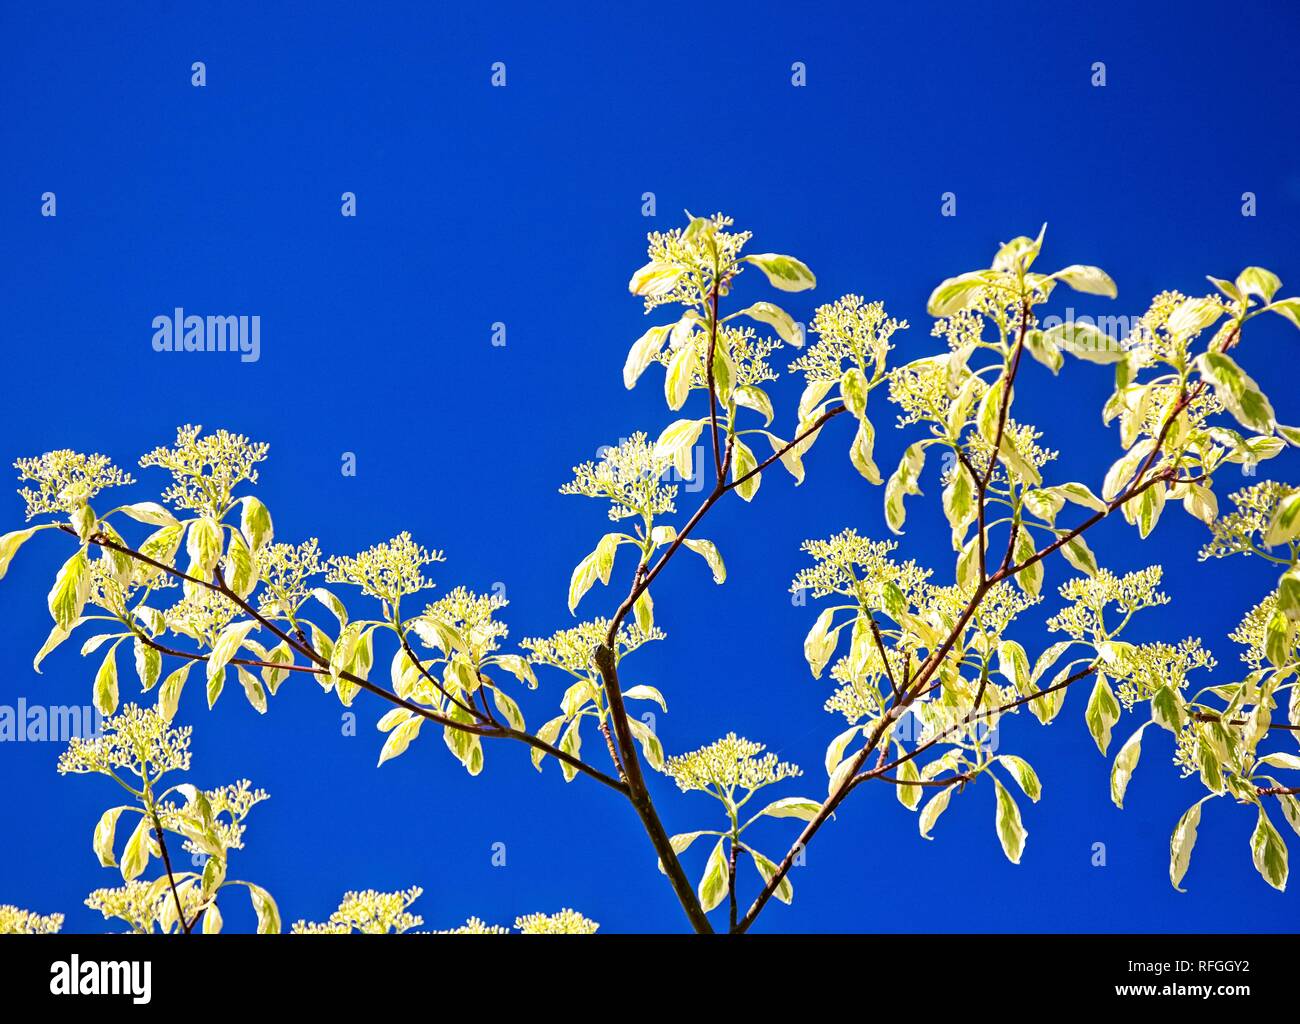 YELLOW LEAVES AGAINST A BLUE SKY BACKGROUND Stock Photo